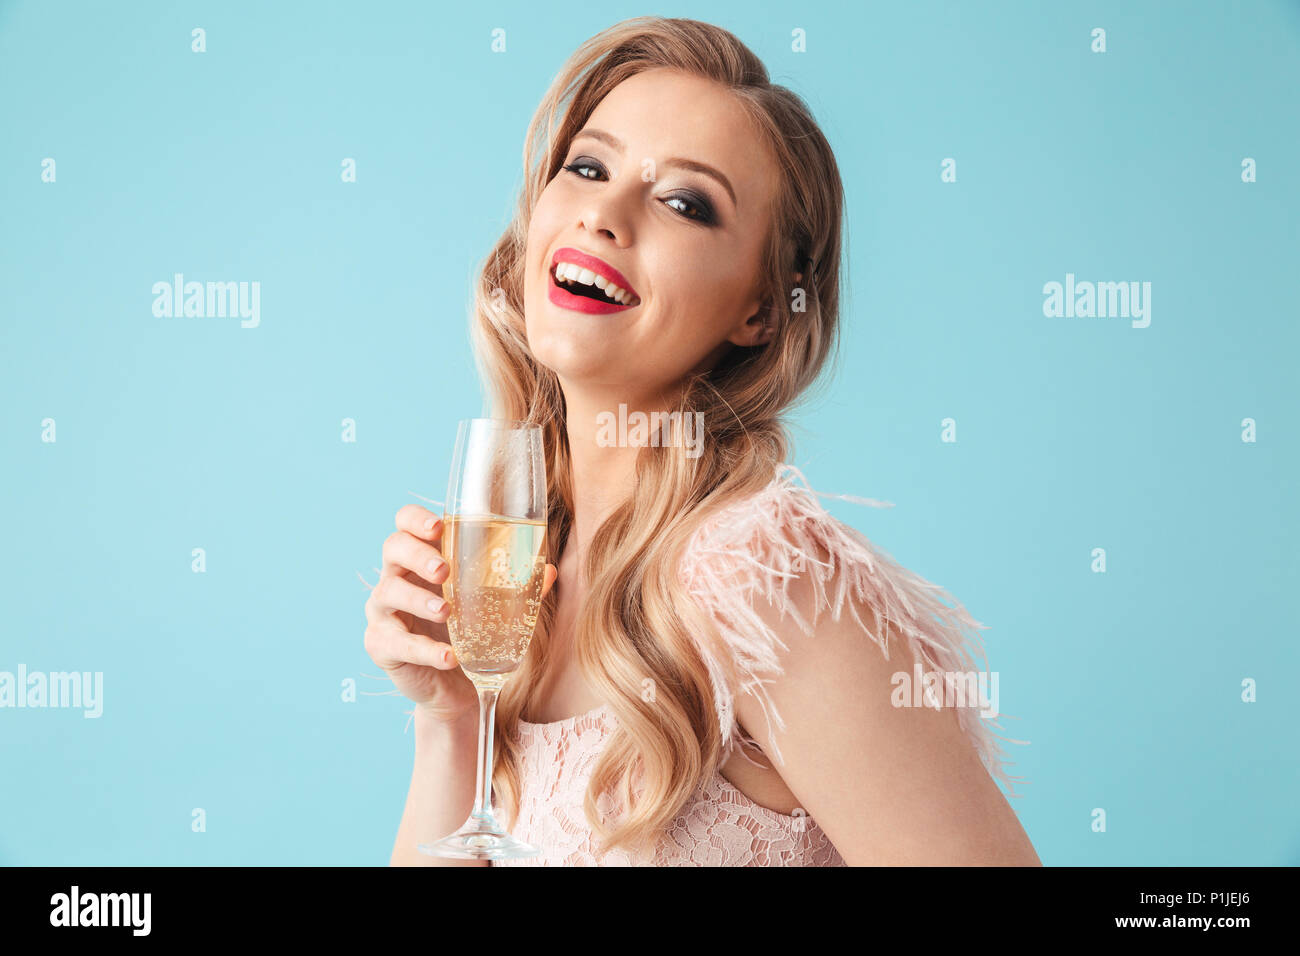 Side view of Cheerful blonde woman in dress posing with champagne and looking at the camera over turquoise background Stock Photo